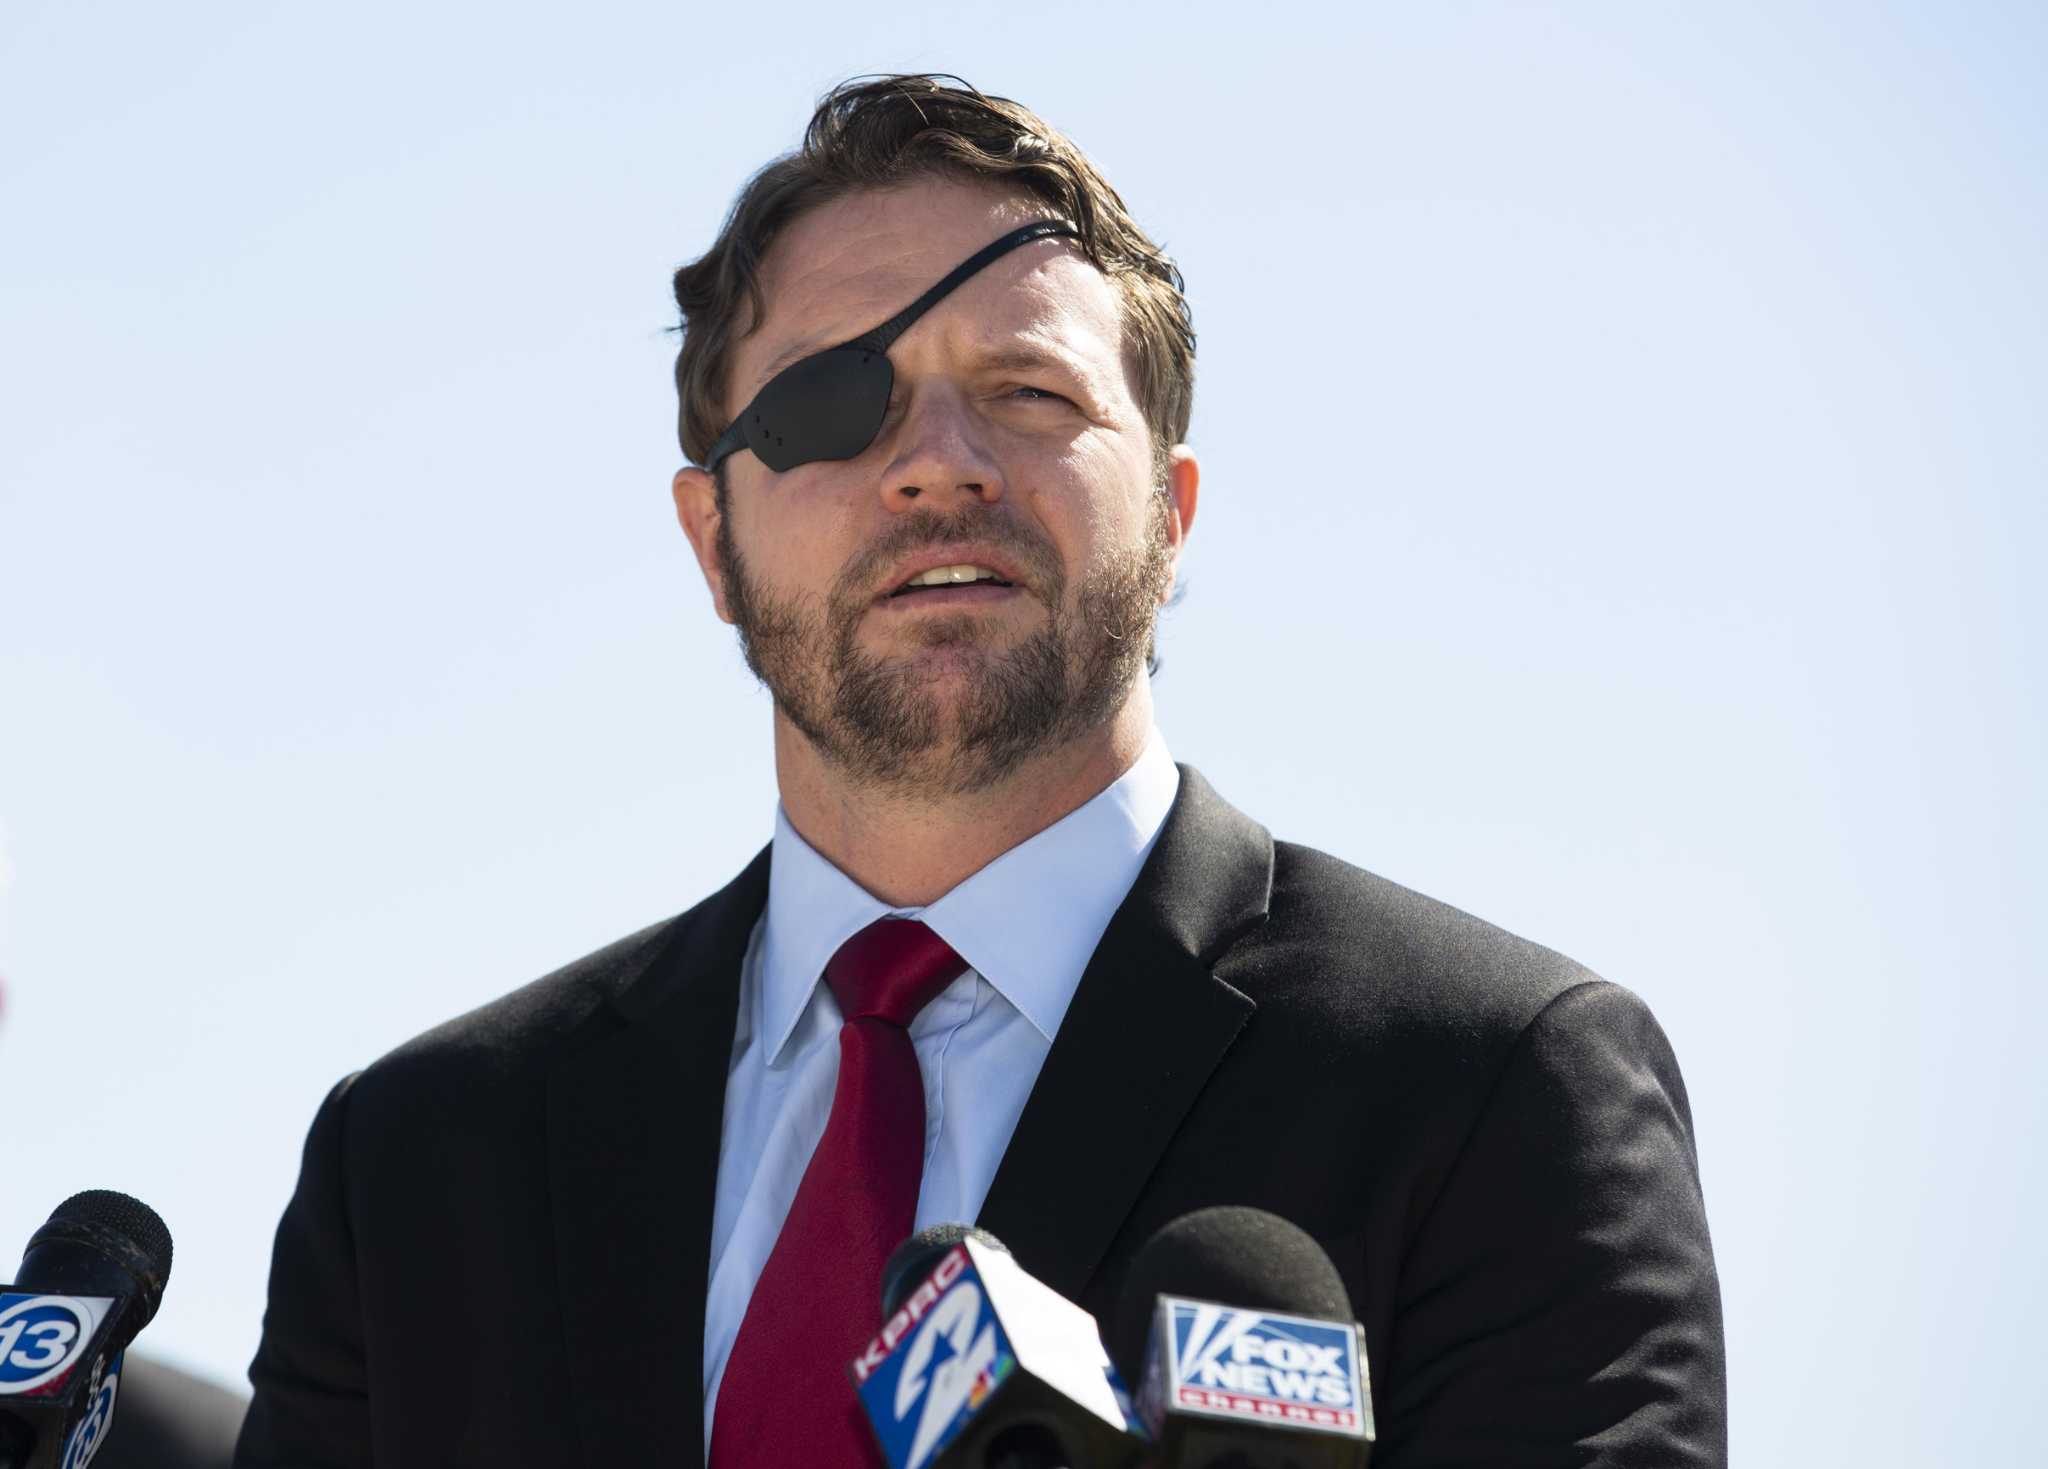 Rep. Dan Crenshaw tackles climate change on ‘The Daily Show’ as he heads to Scotland - Houston Chronicle